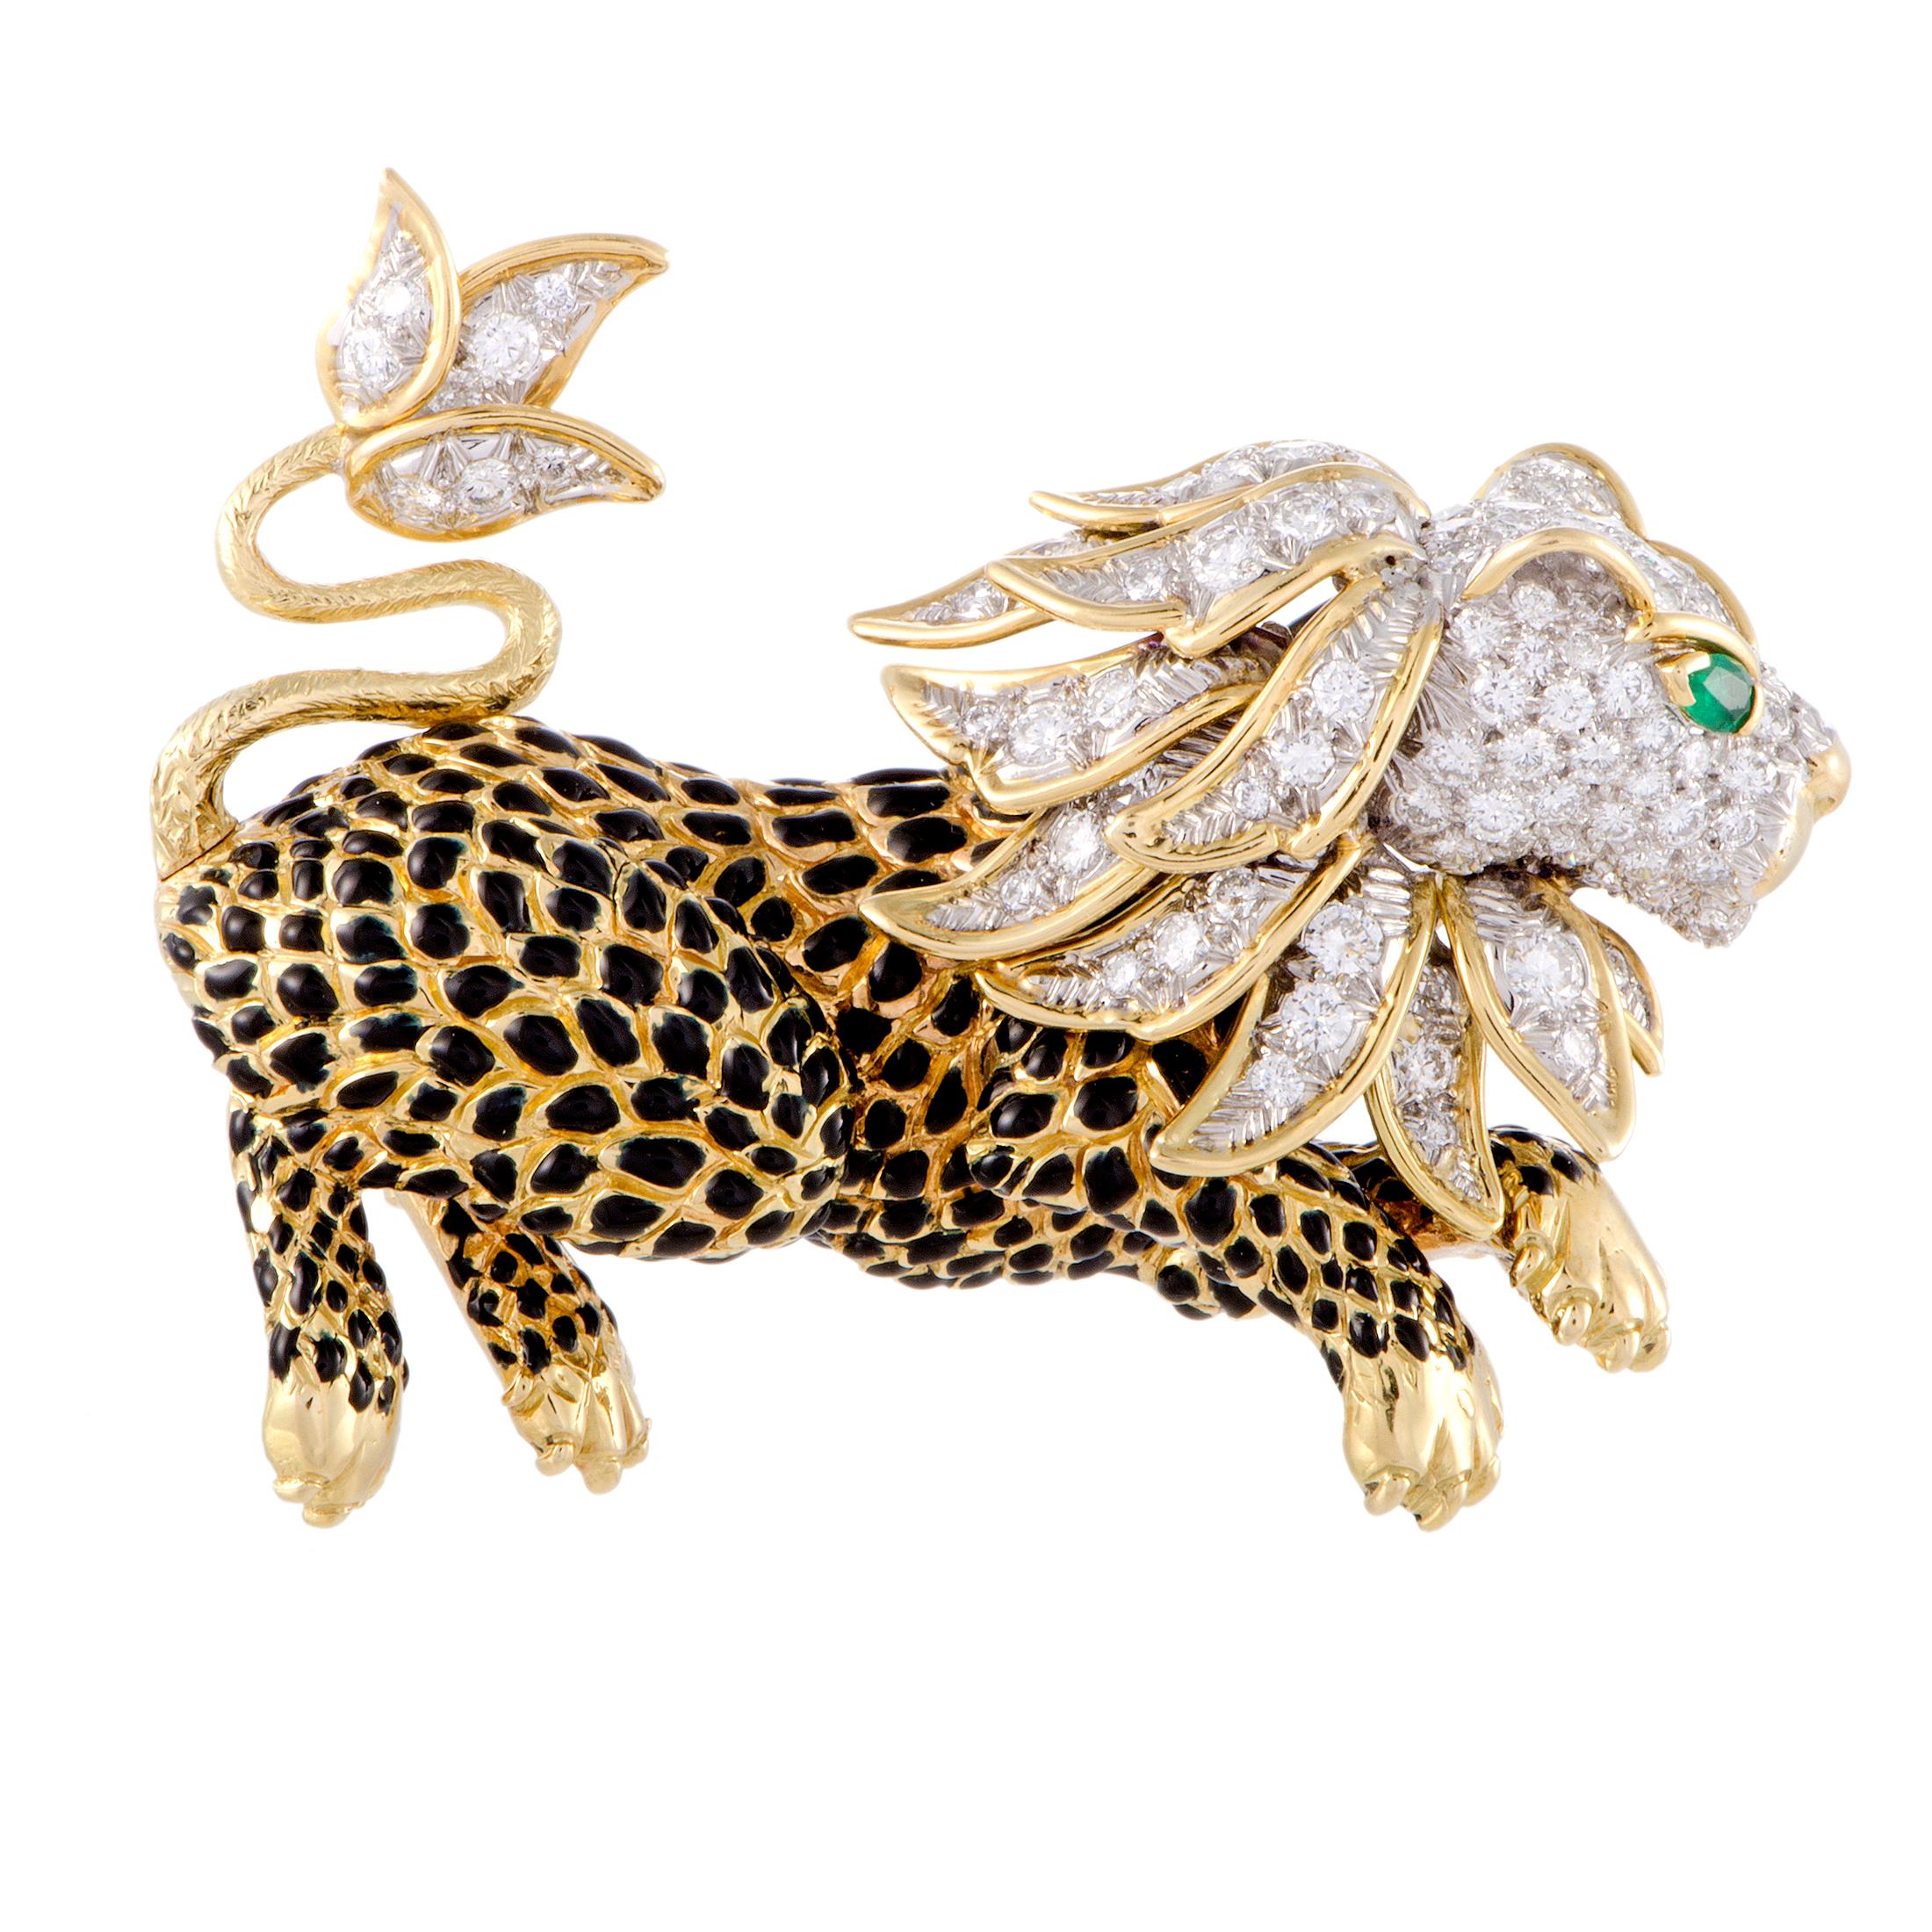 Women's David Webb Diamond Pave and Emerald 18K Yellow and White Gold Leapon Brooch